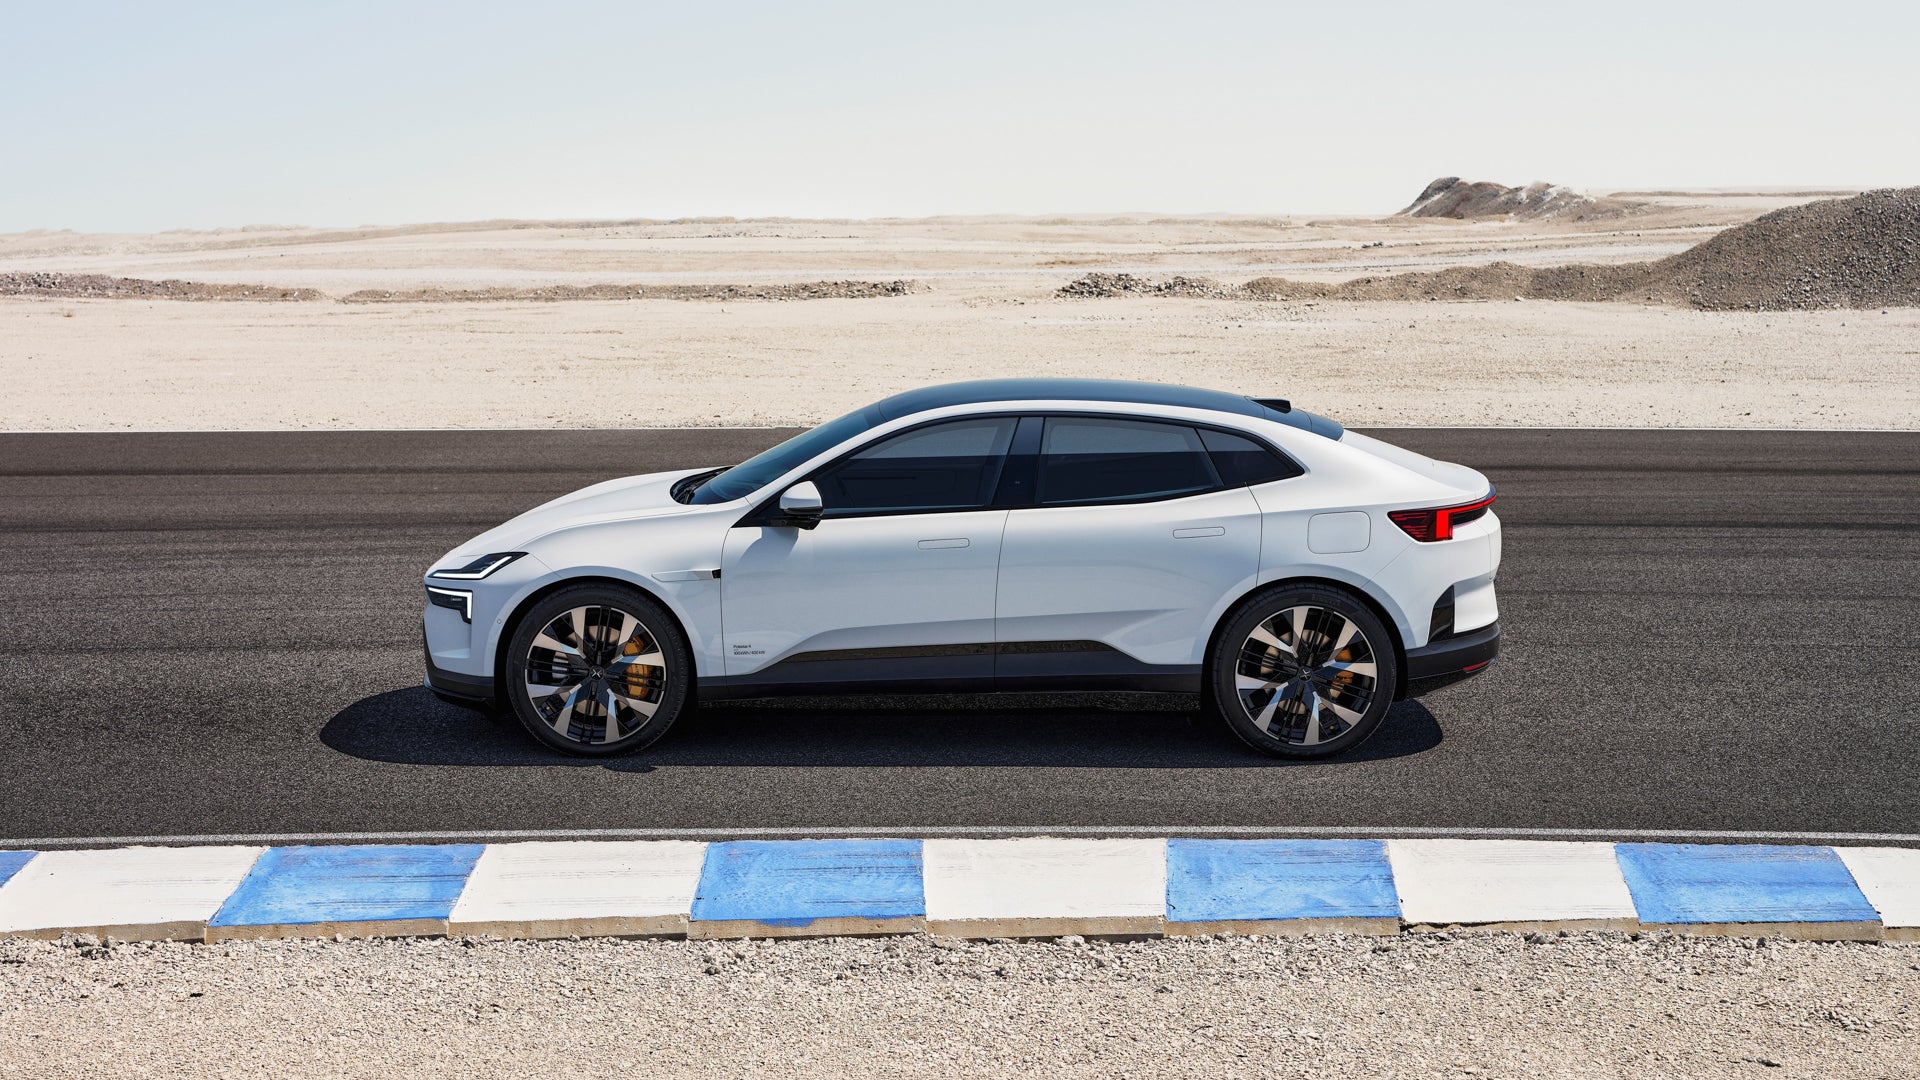 :The starting price for the Polestar 4 is $56,300 and there is no option to pay extra for a hatchback model.